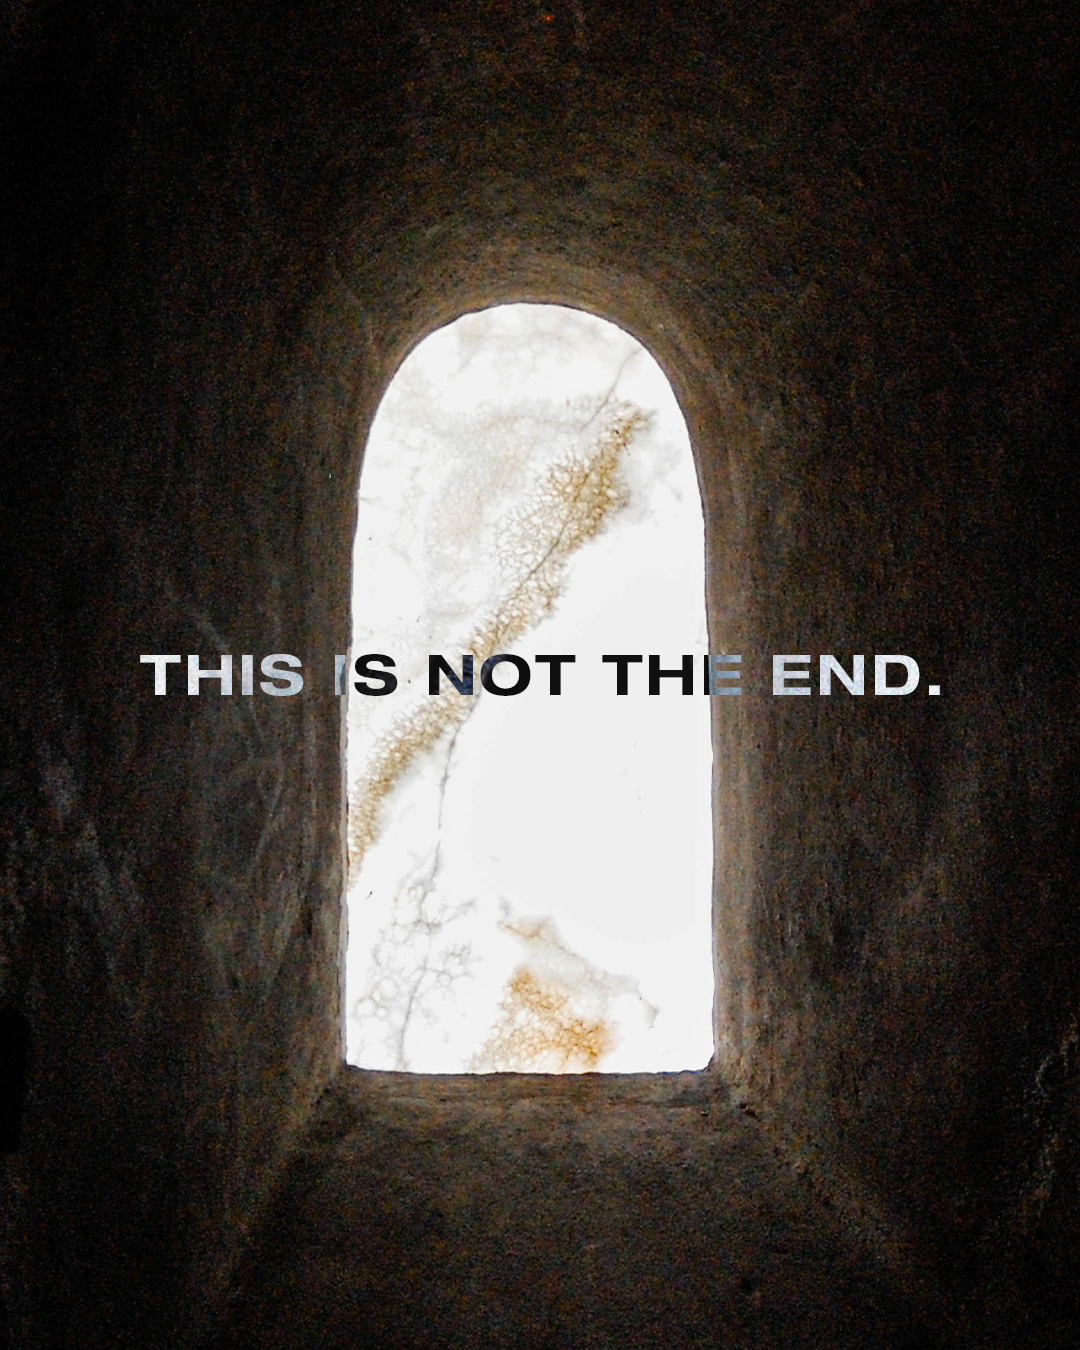 This is not the end